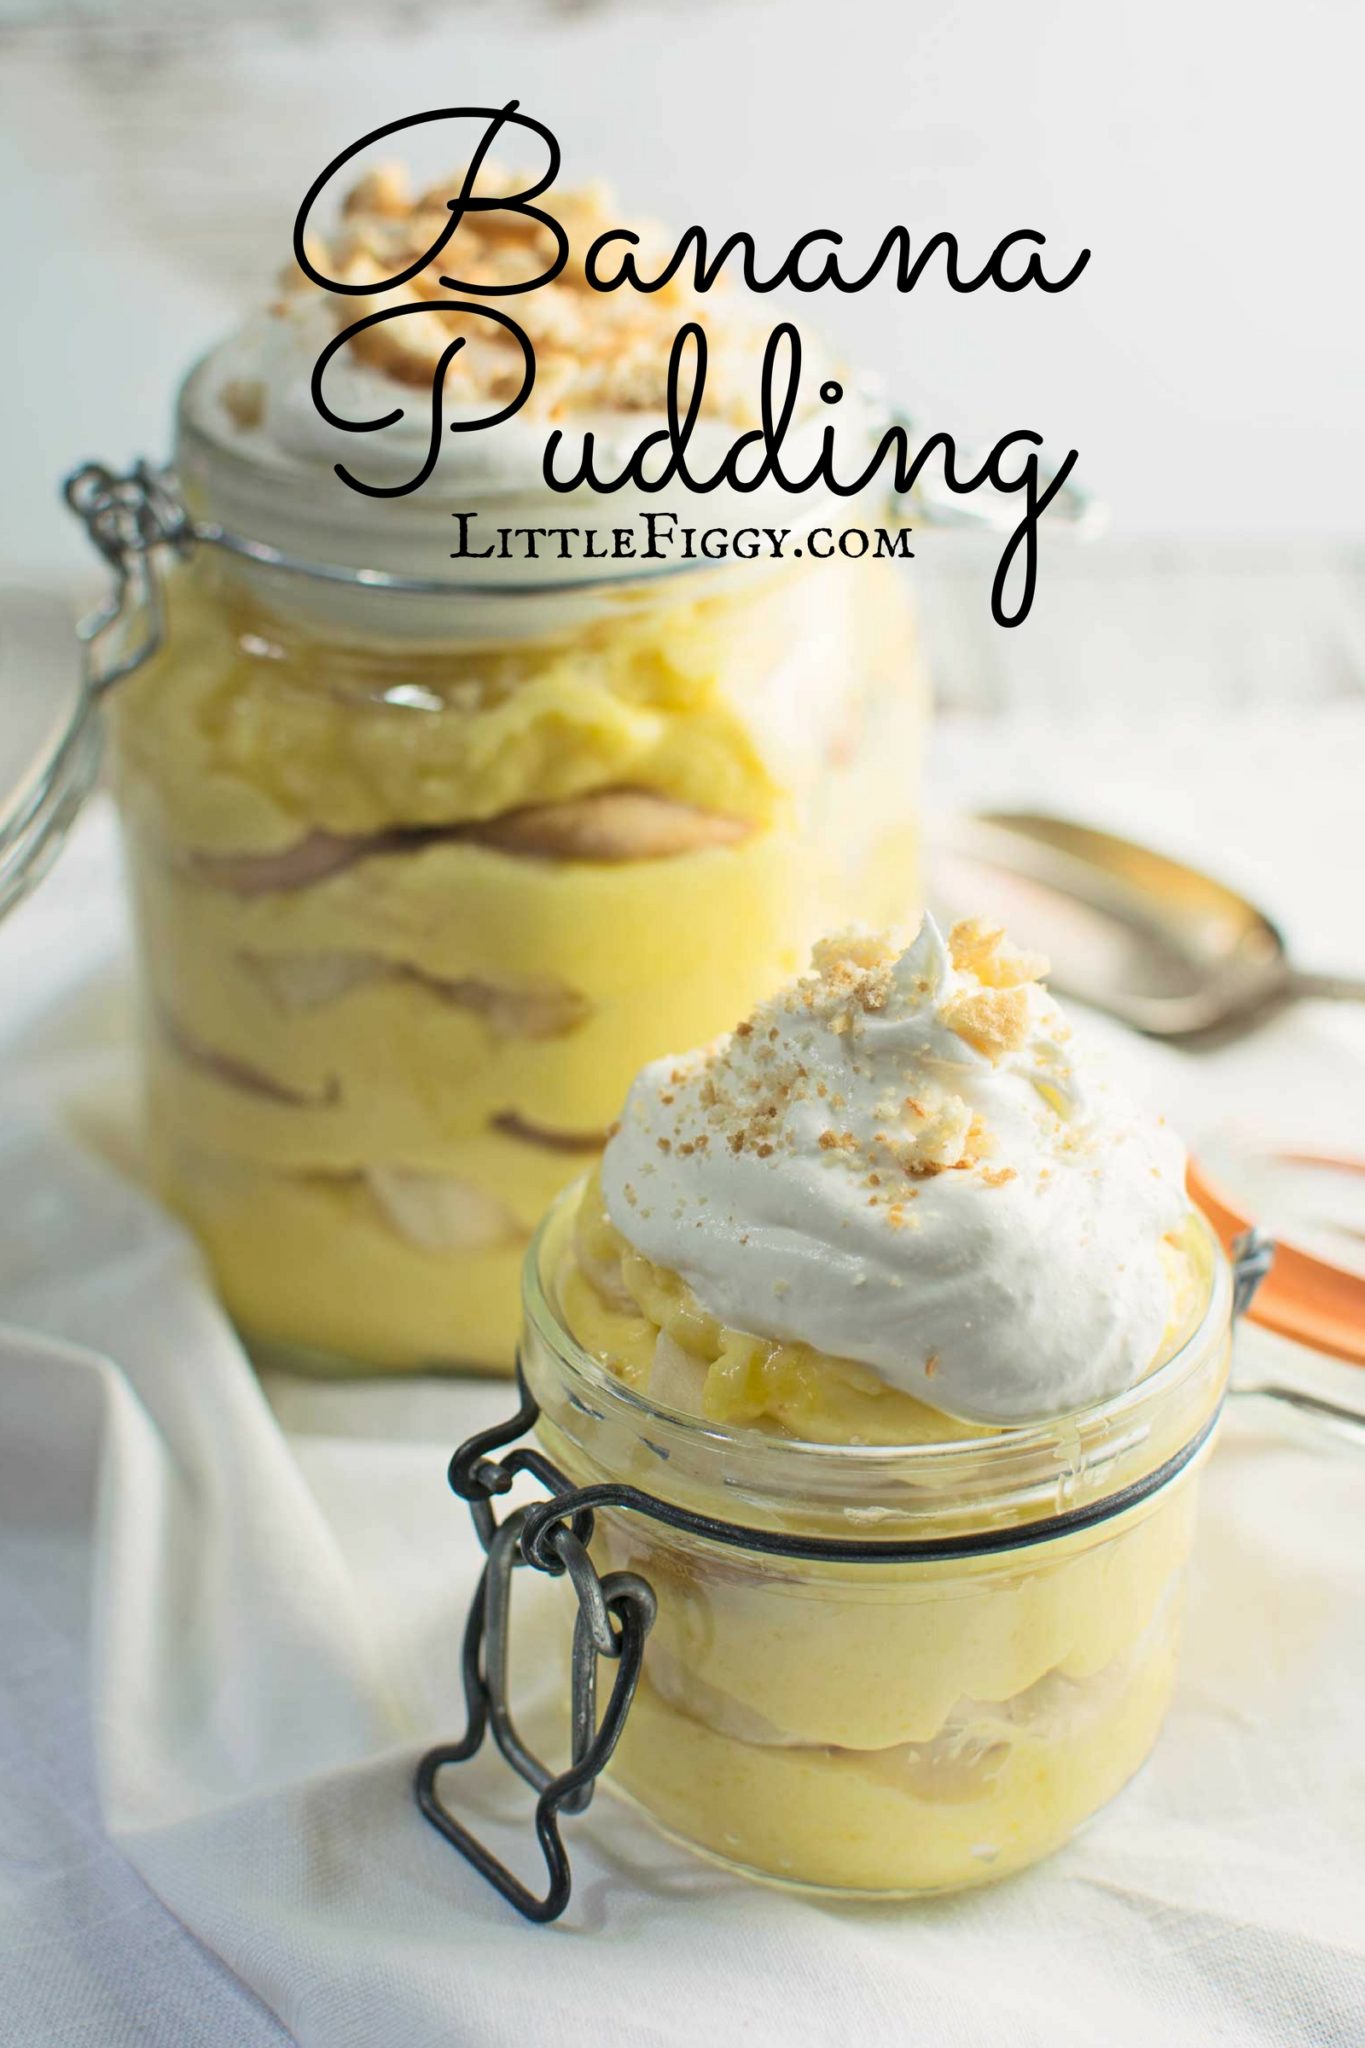 Try this easy to make Banana Pudding! Creamy, full of bananas and layered with crunchy vanilla wafers. Recipe @LittleFiggyFood